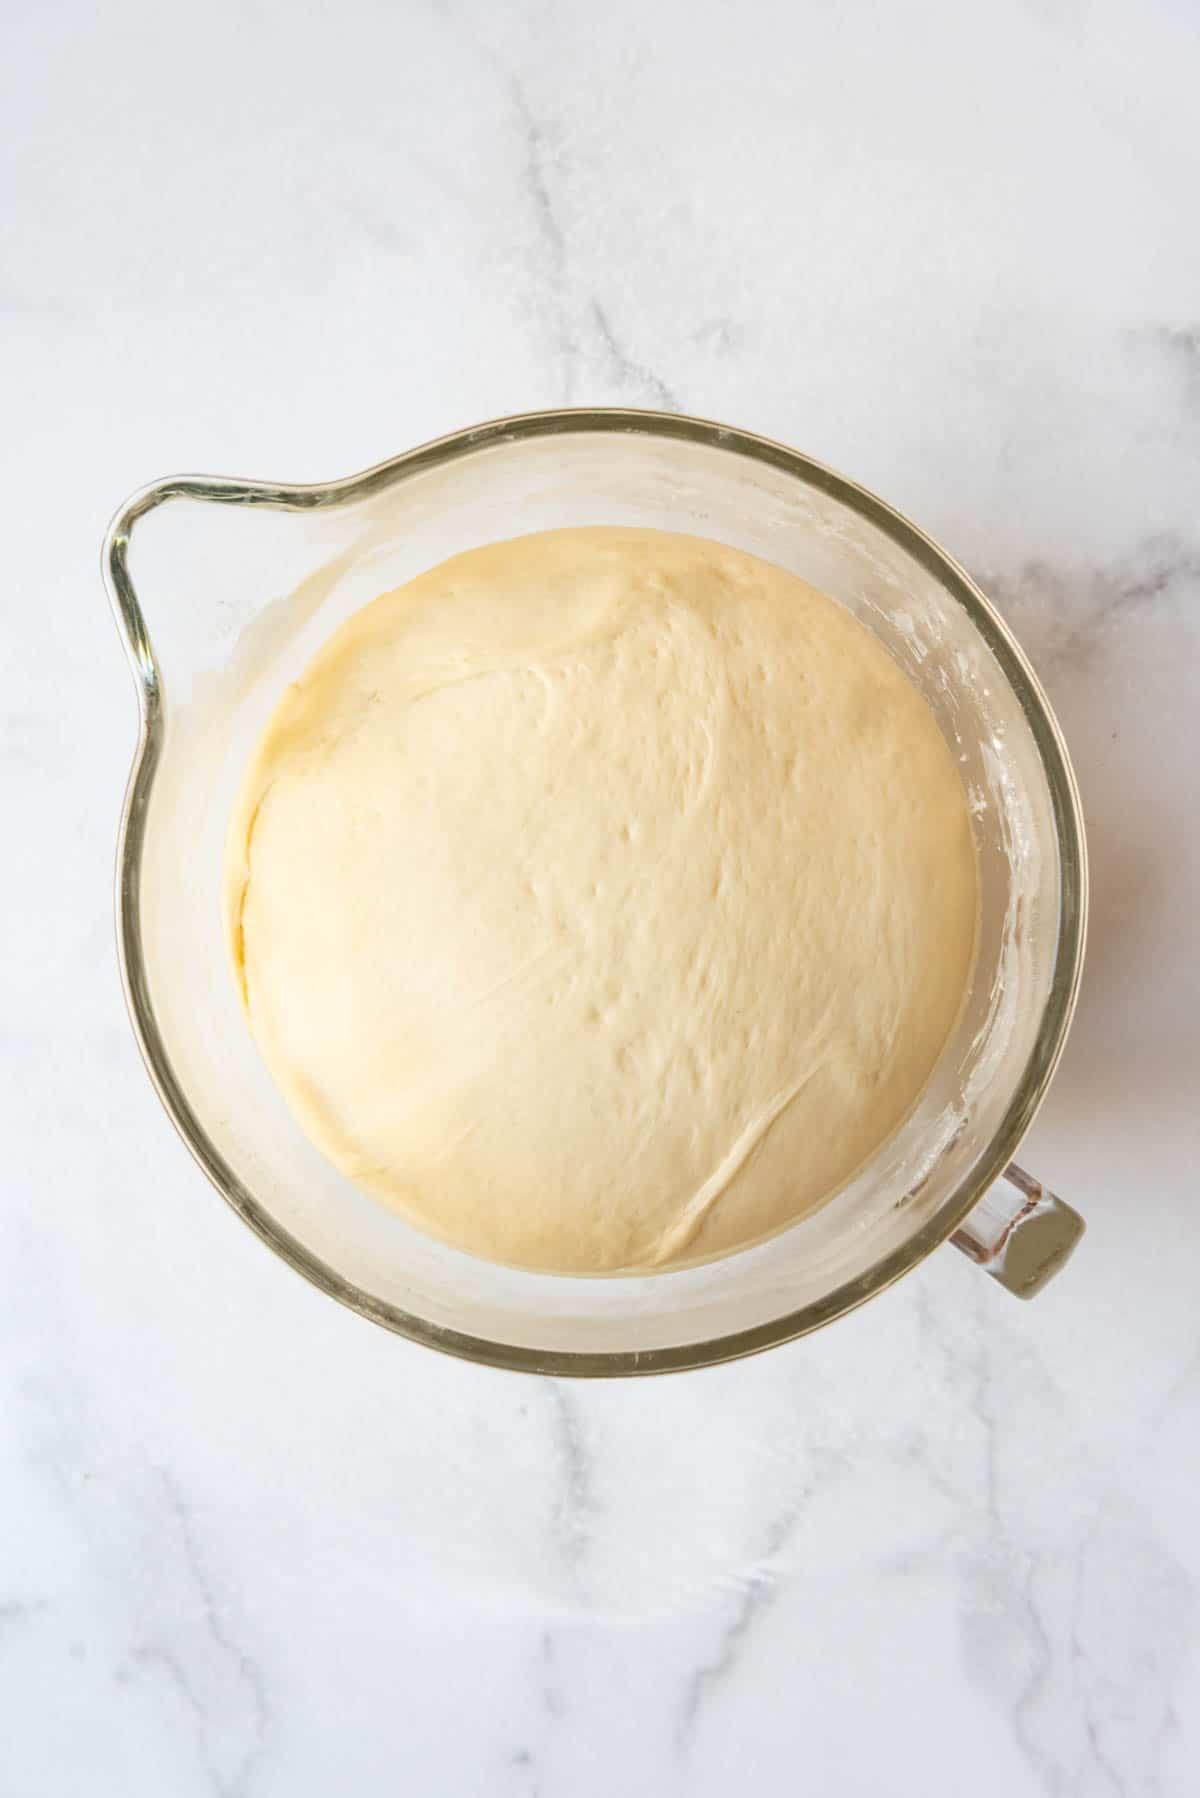 Risen orange sweet roll dough that has doubled in size in a glass bowl.